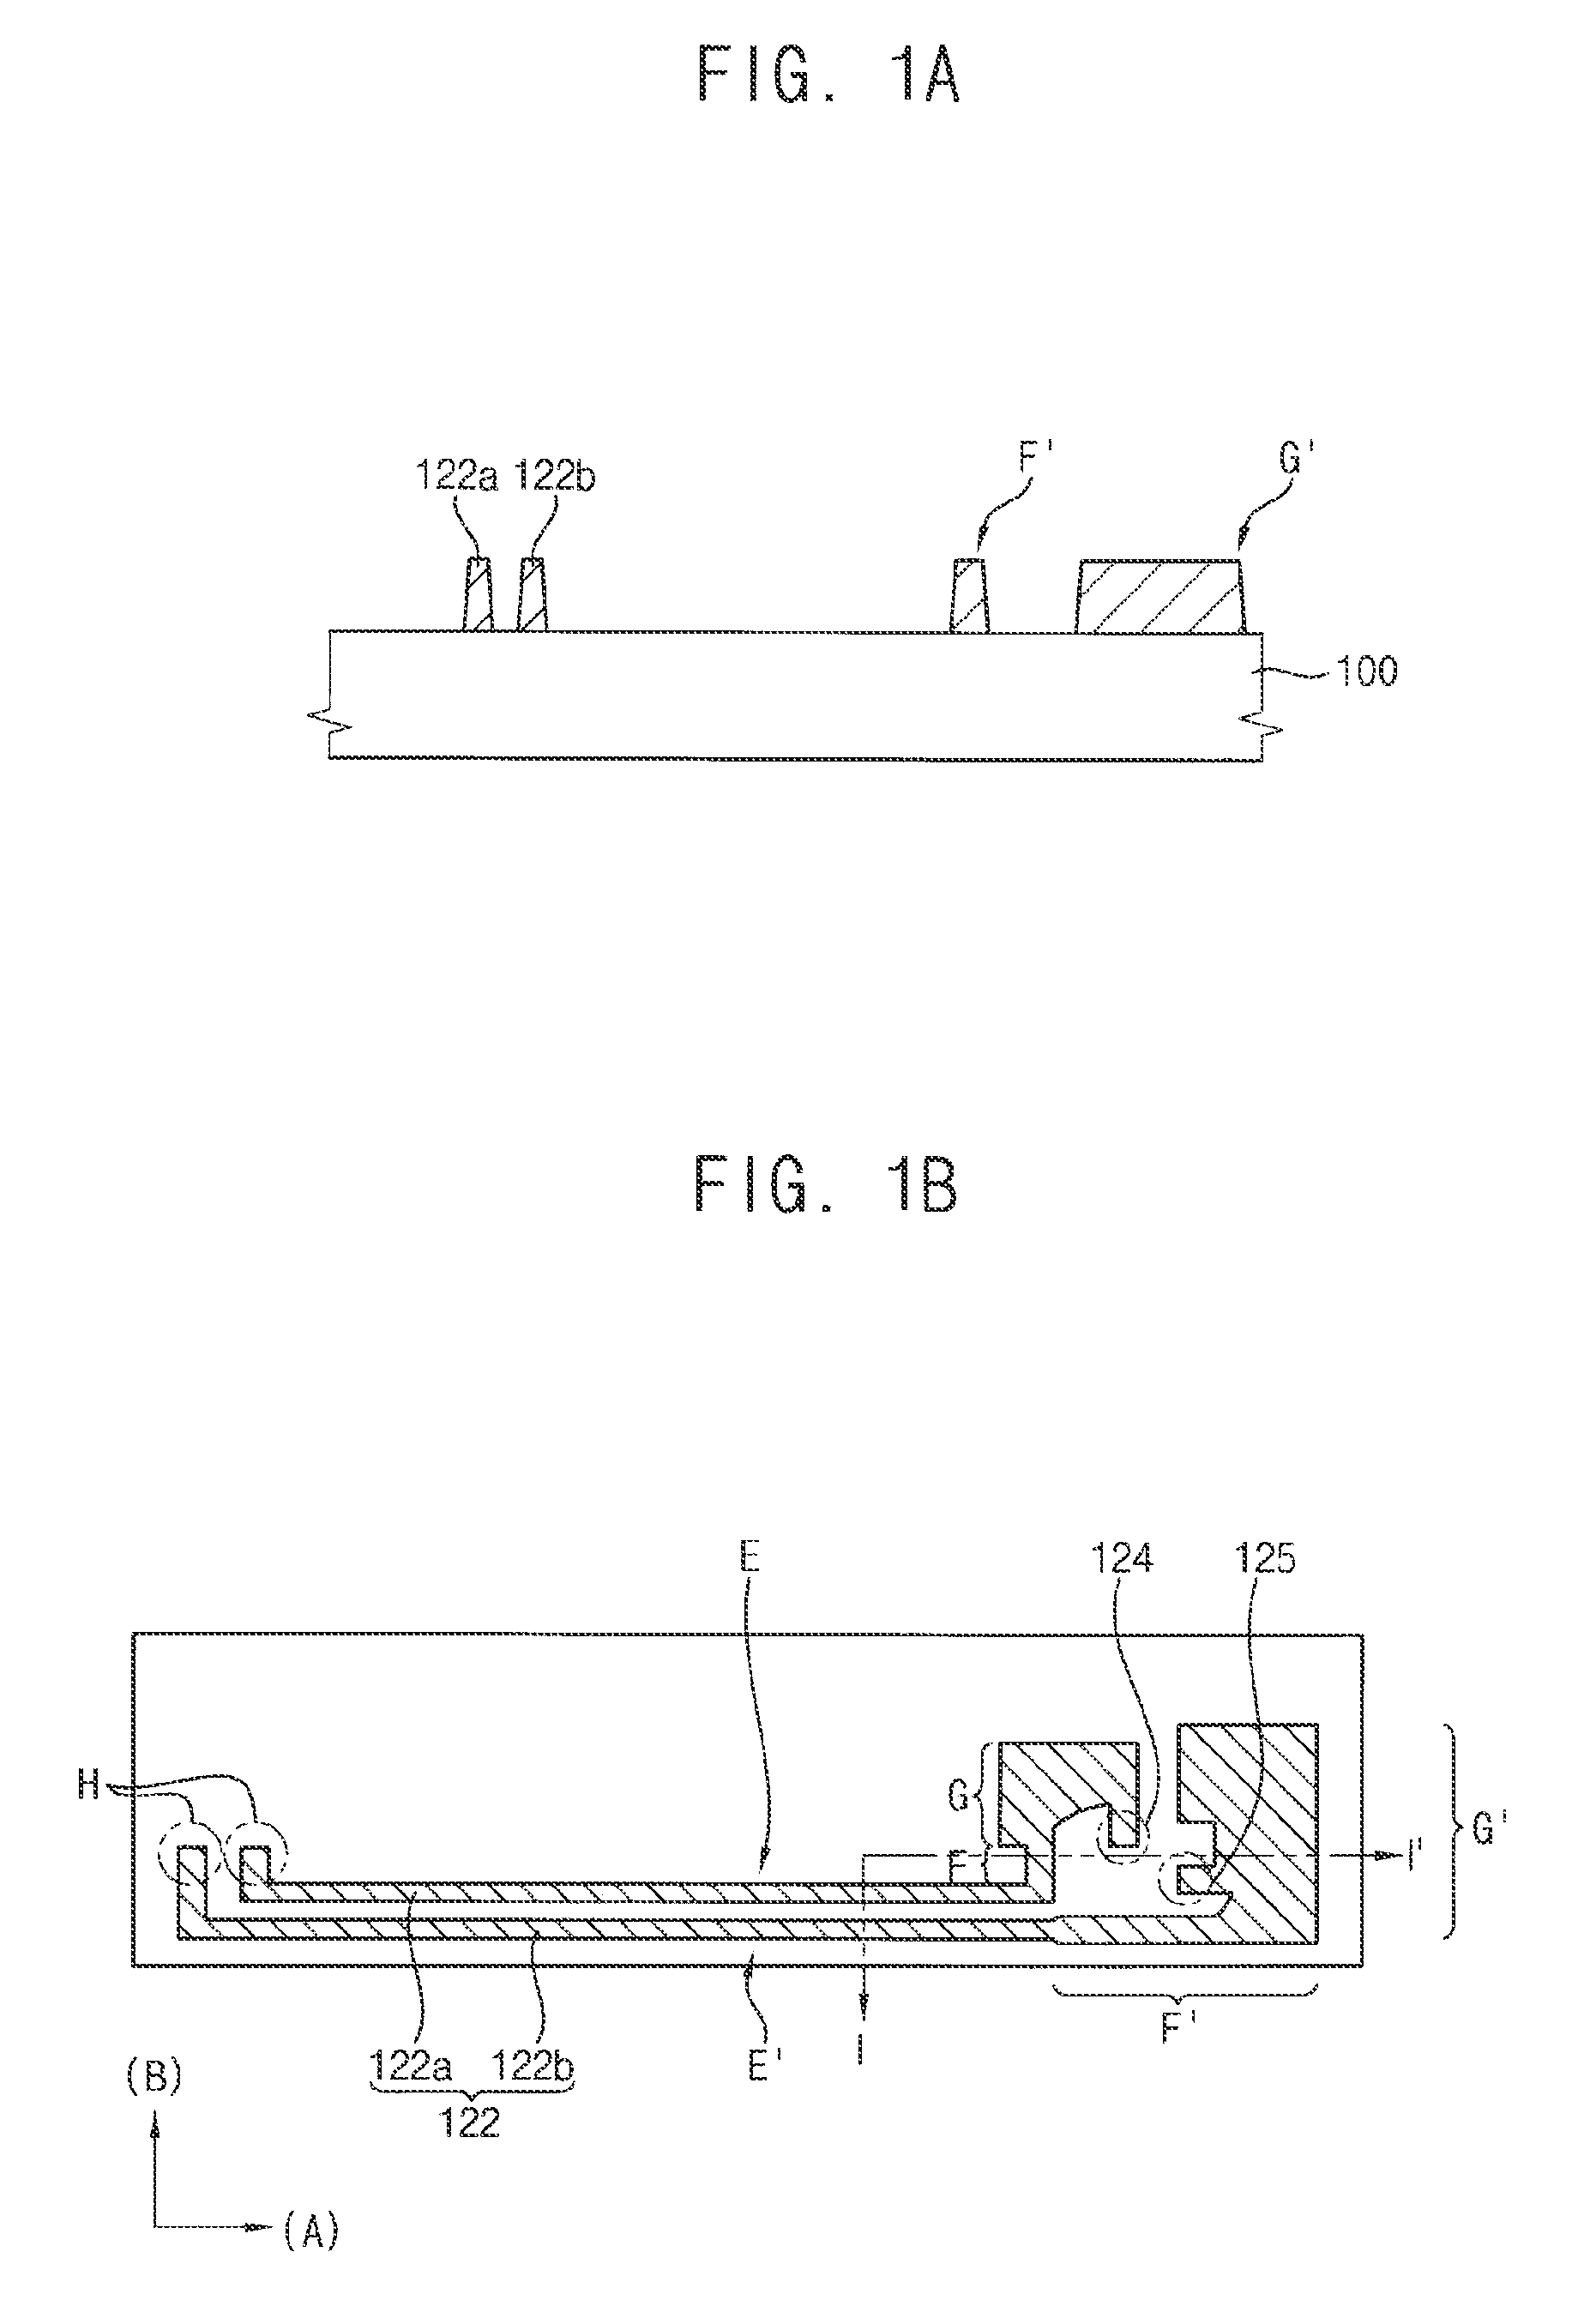 Pattern structures in semiconductor devices